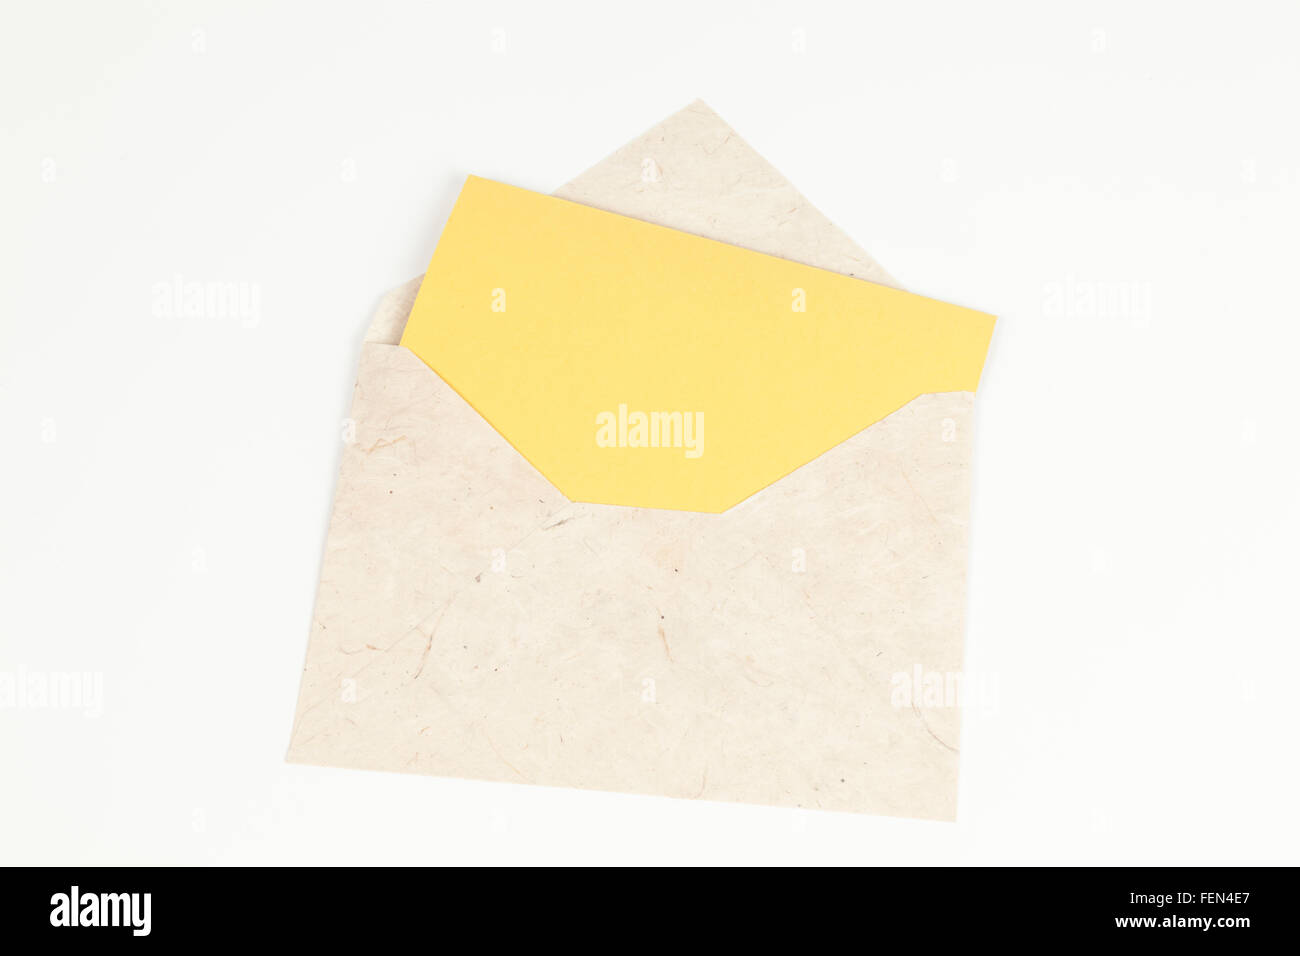 Envelope and yellow card Stock Photo